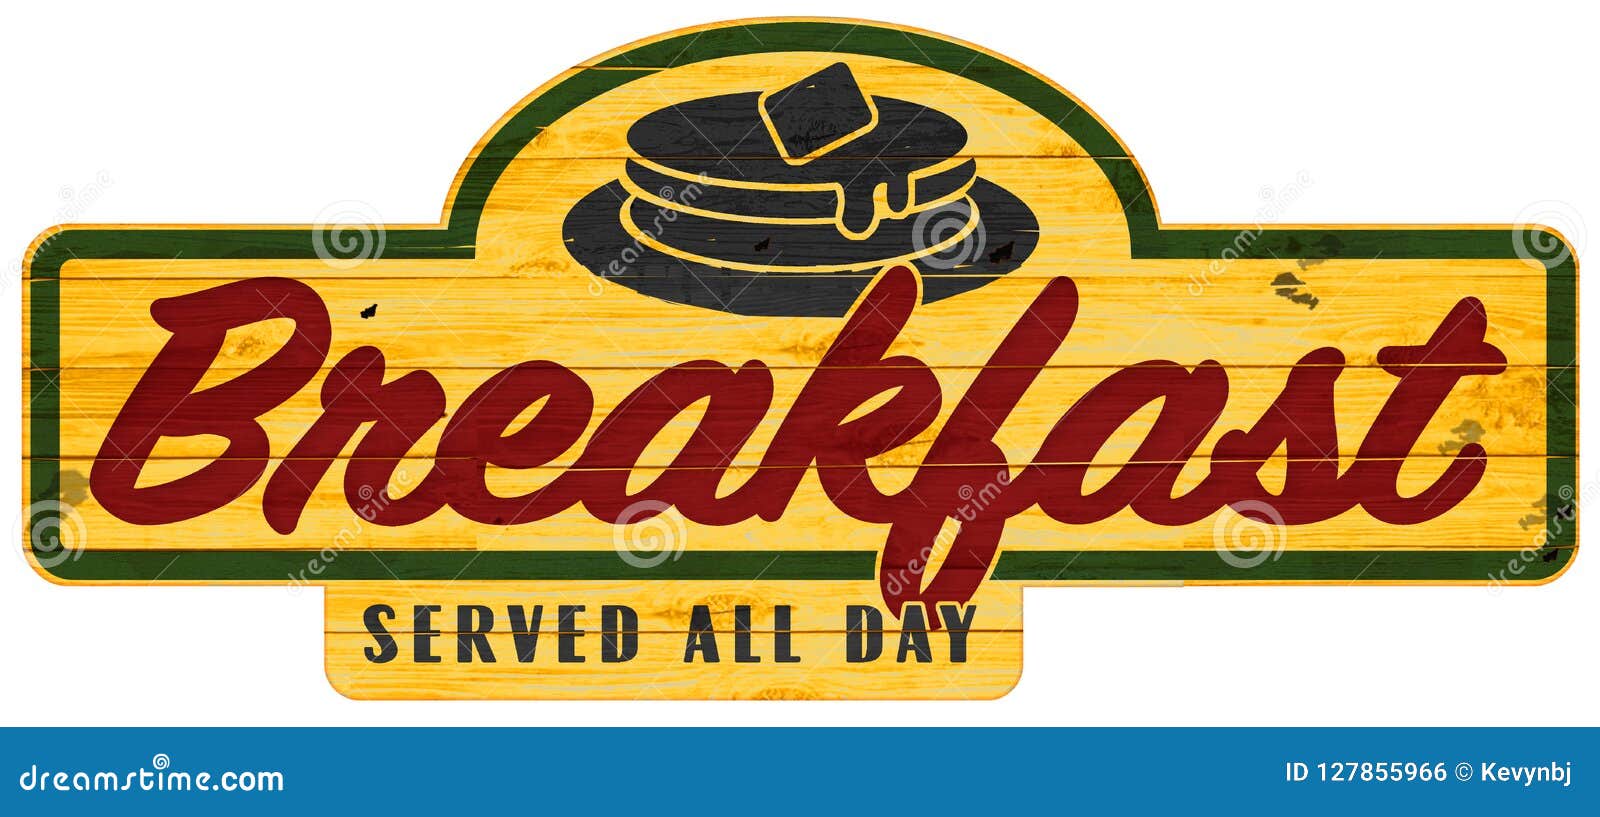 Breakfast Served All Day Sign Plaque Pancakes Stock Illustration